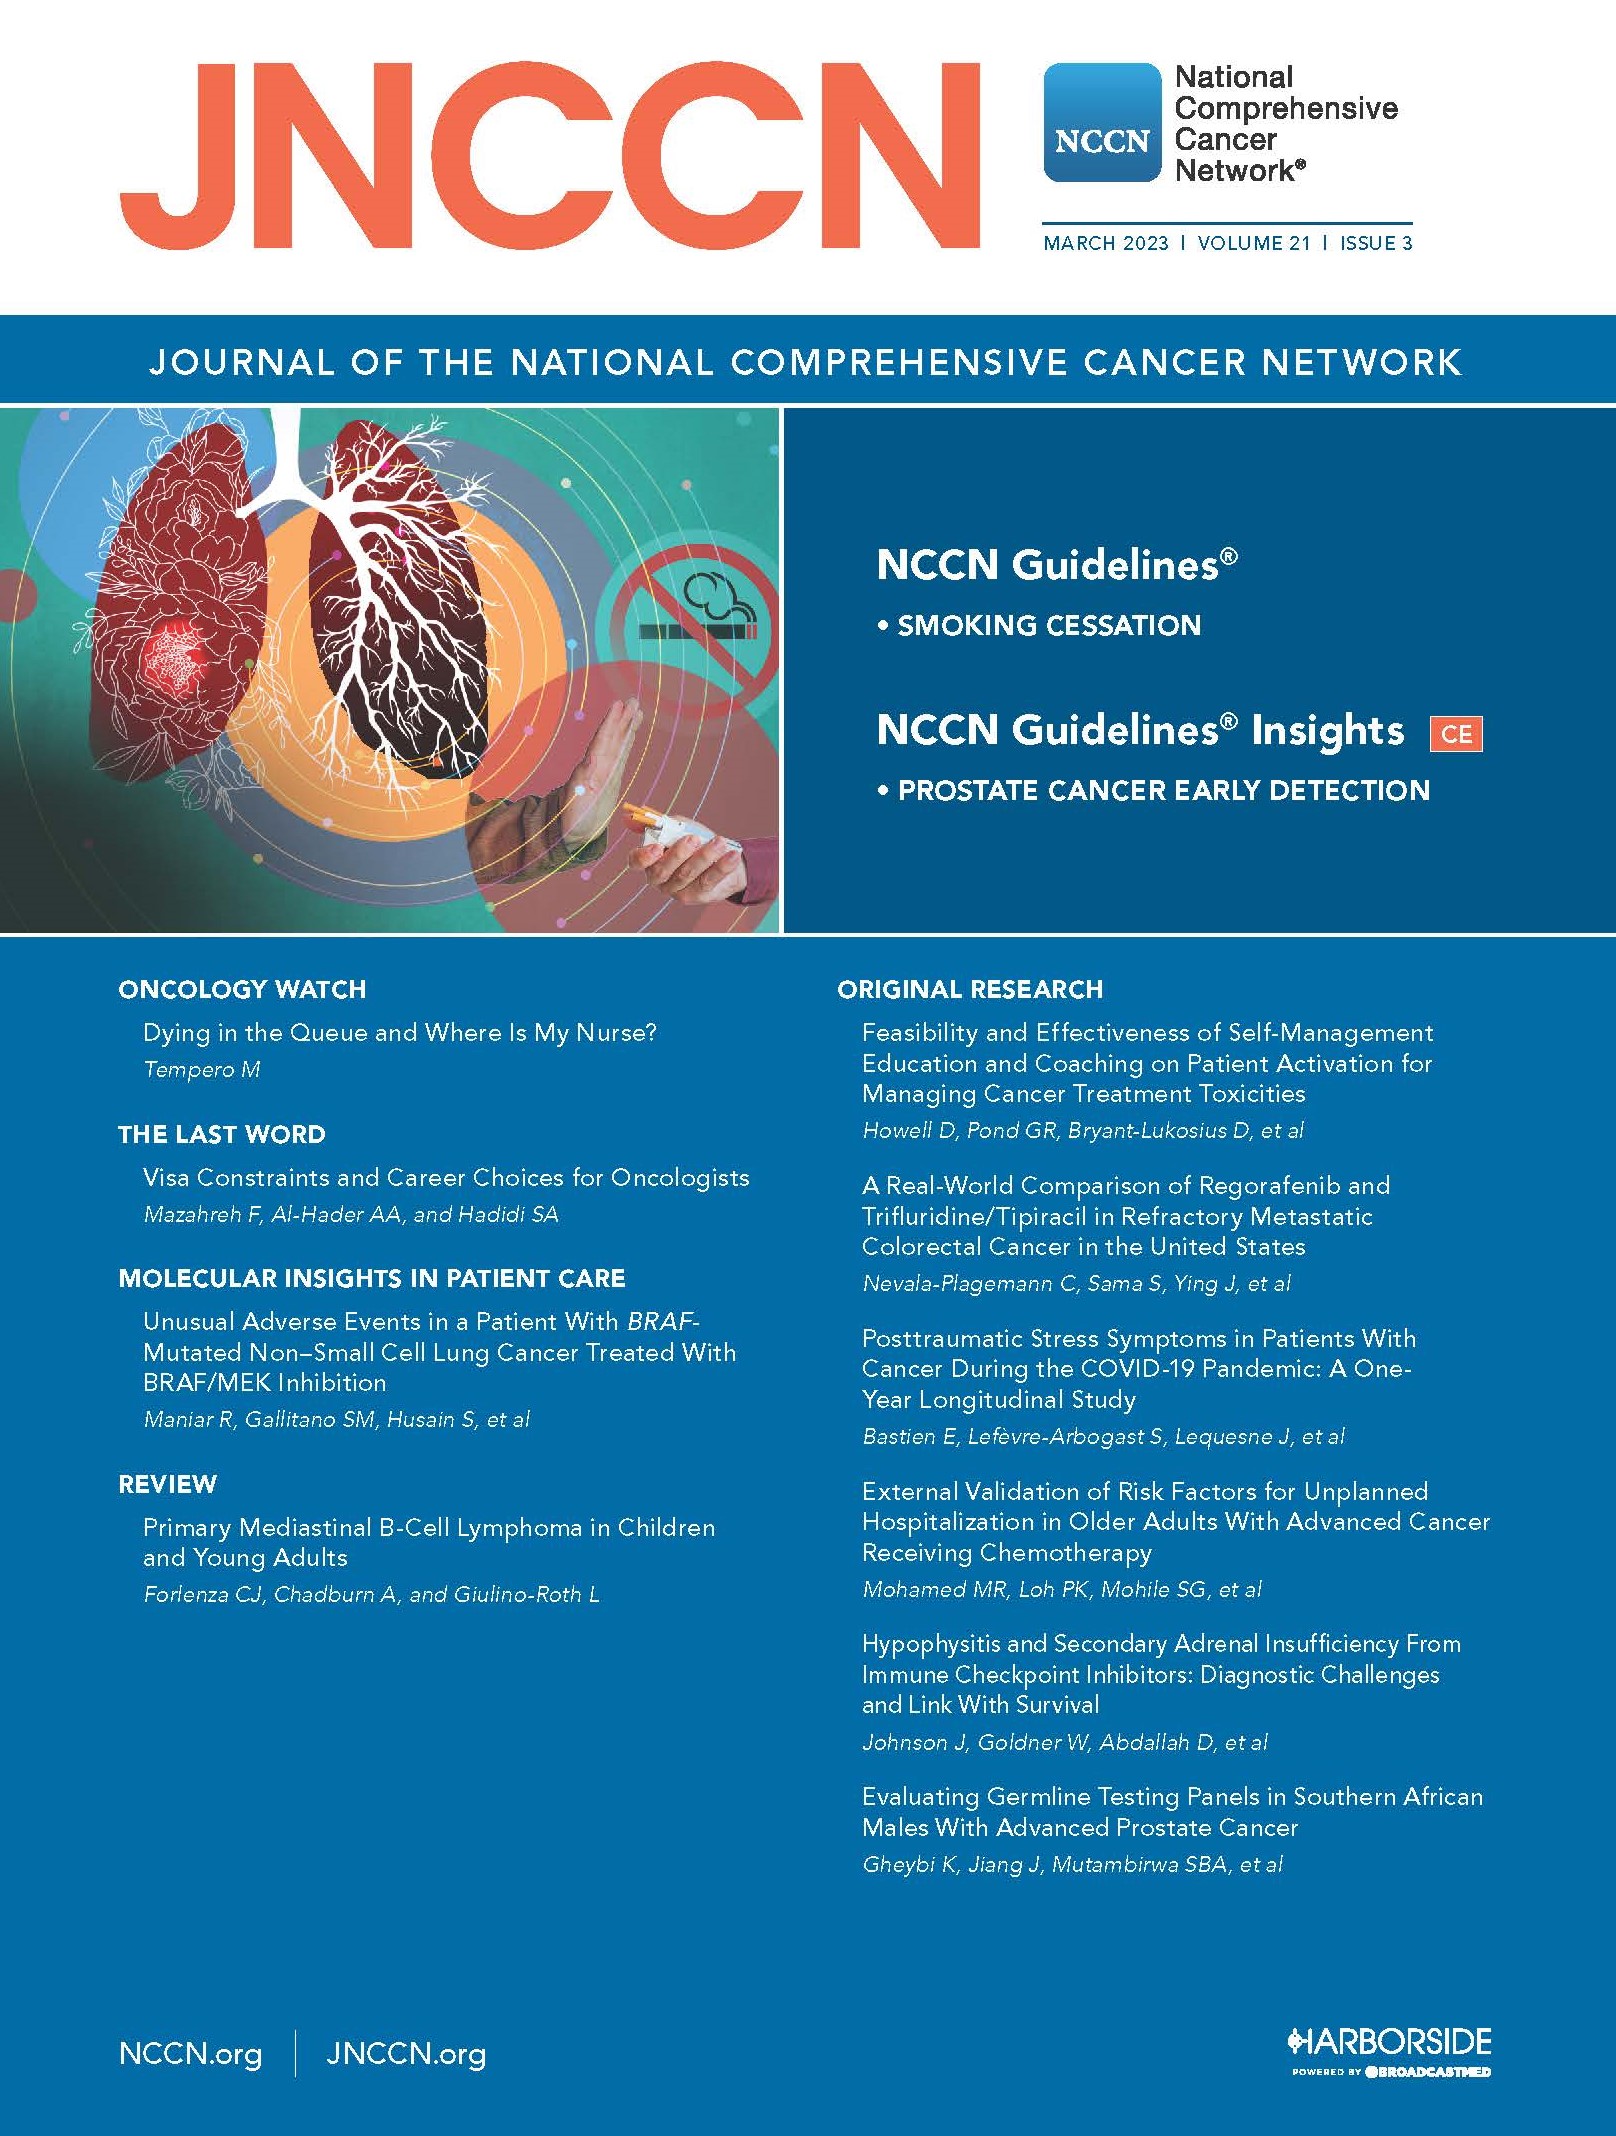 JNCCN Cover, March 2023